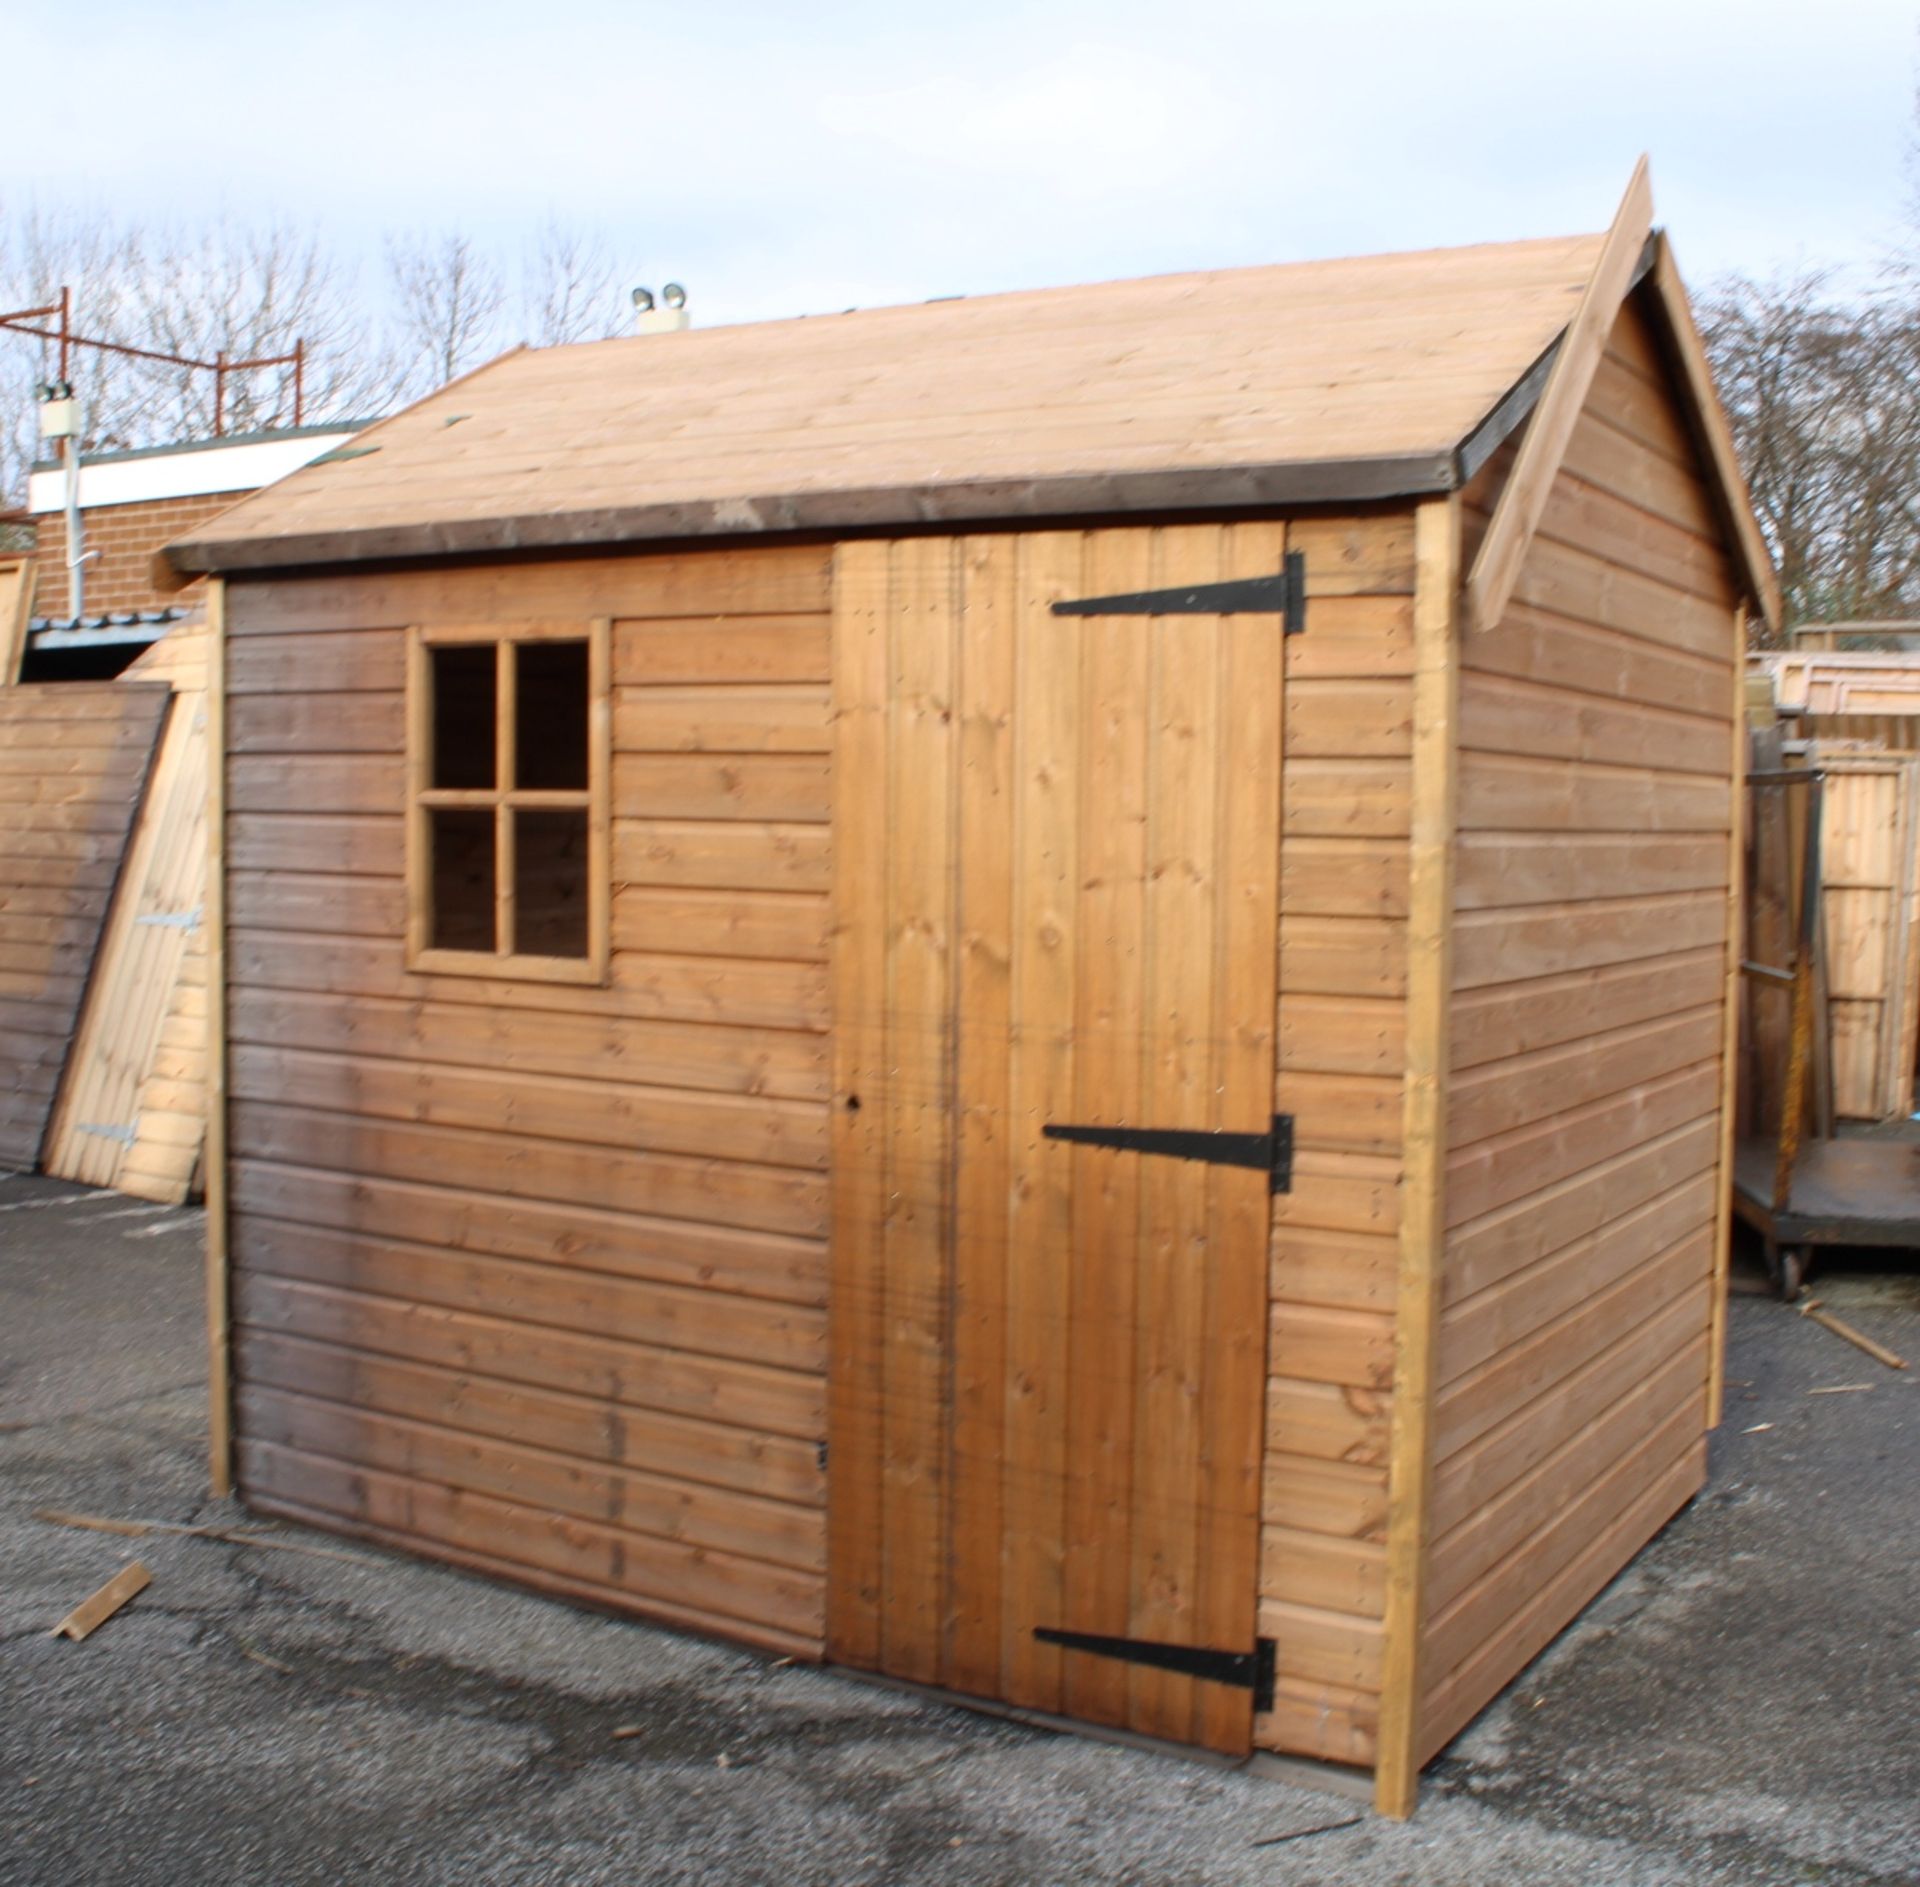 8x6 superior height apex shed, Standard 16mm Nominal Cladding RRP£1,006 - Image 2 of 4